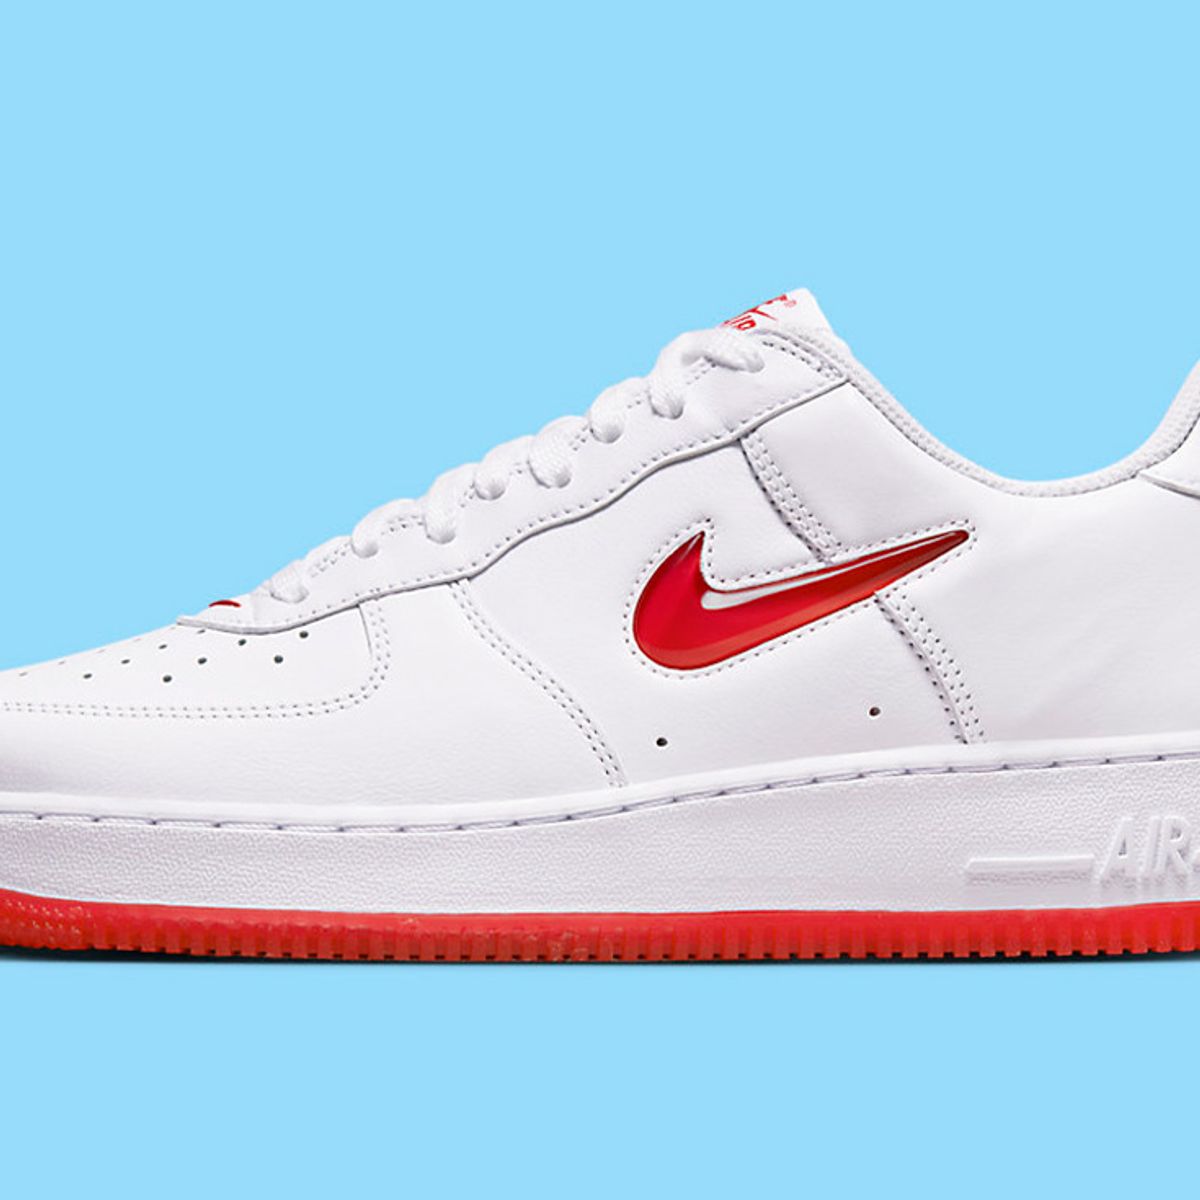 bleek vergeven tijger Jewel Swooshes Appear on the Nike Air Force 1 Low 'Colour of the Month' -  Sneaker Freaker